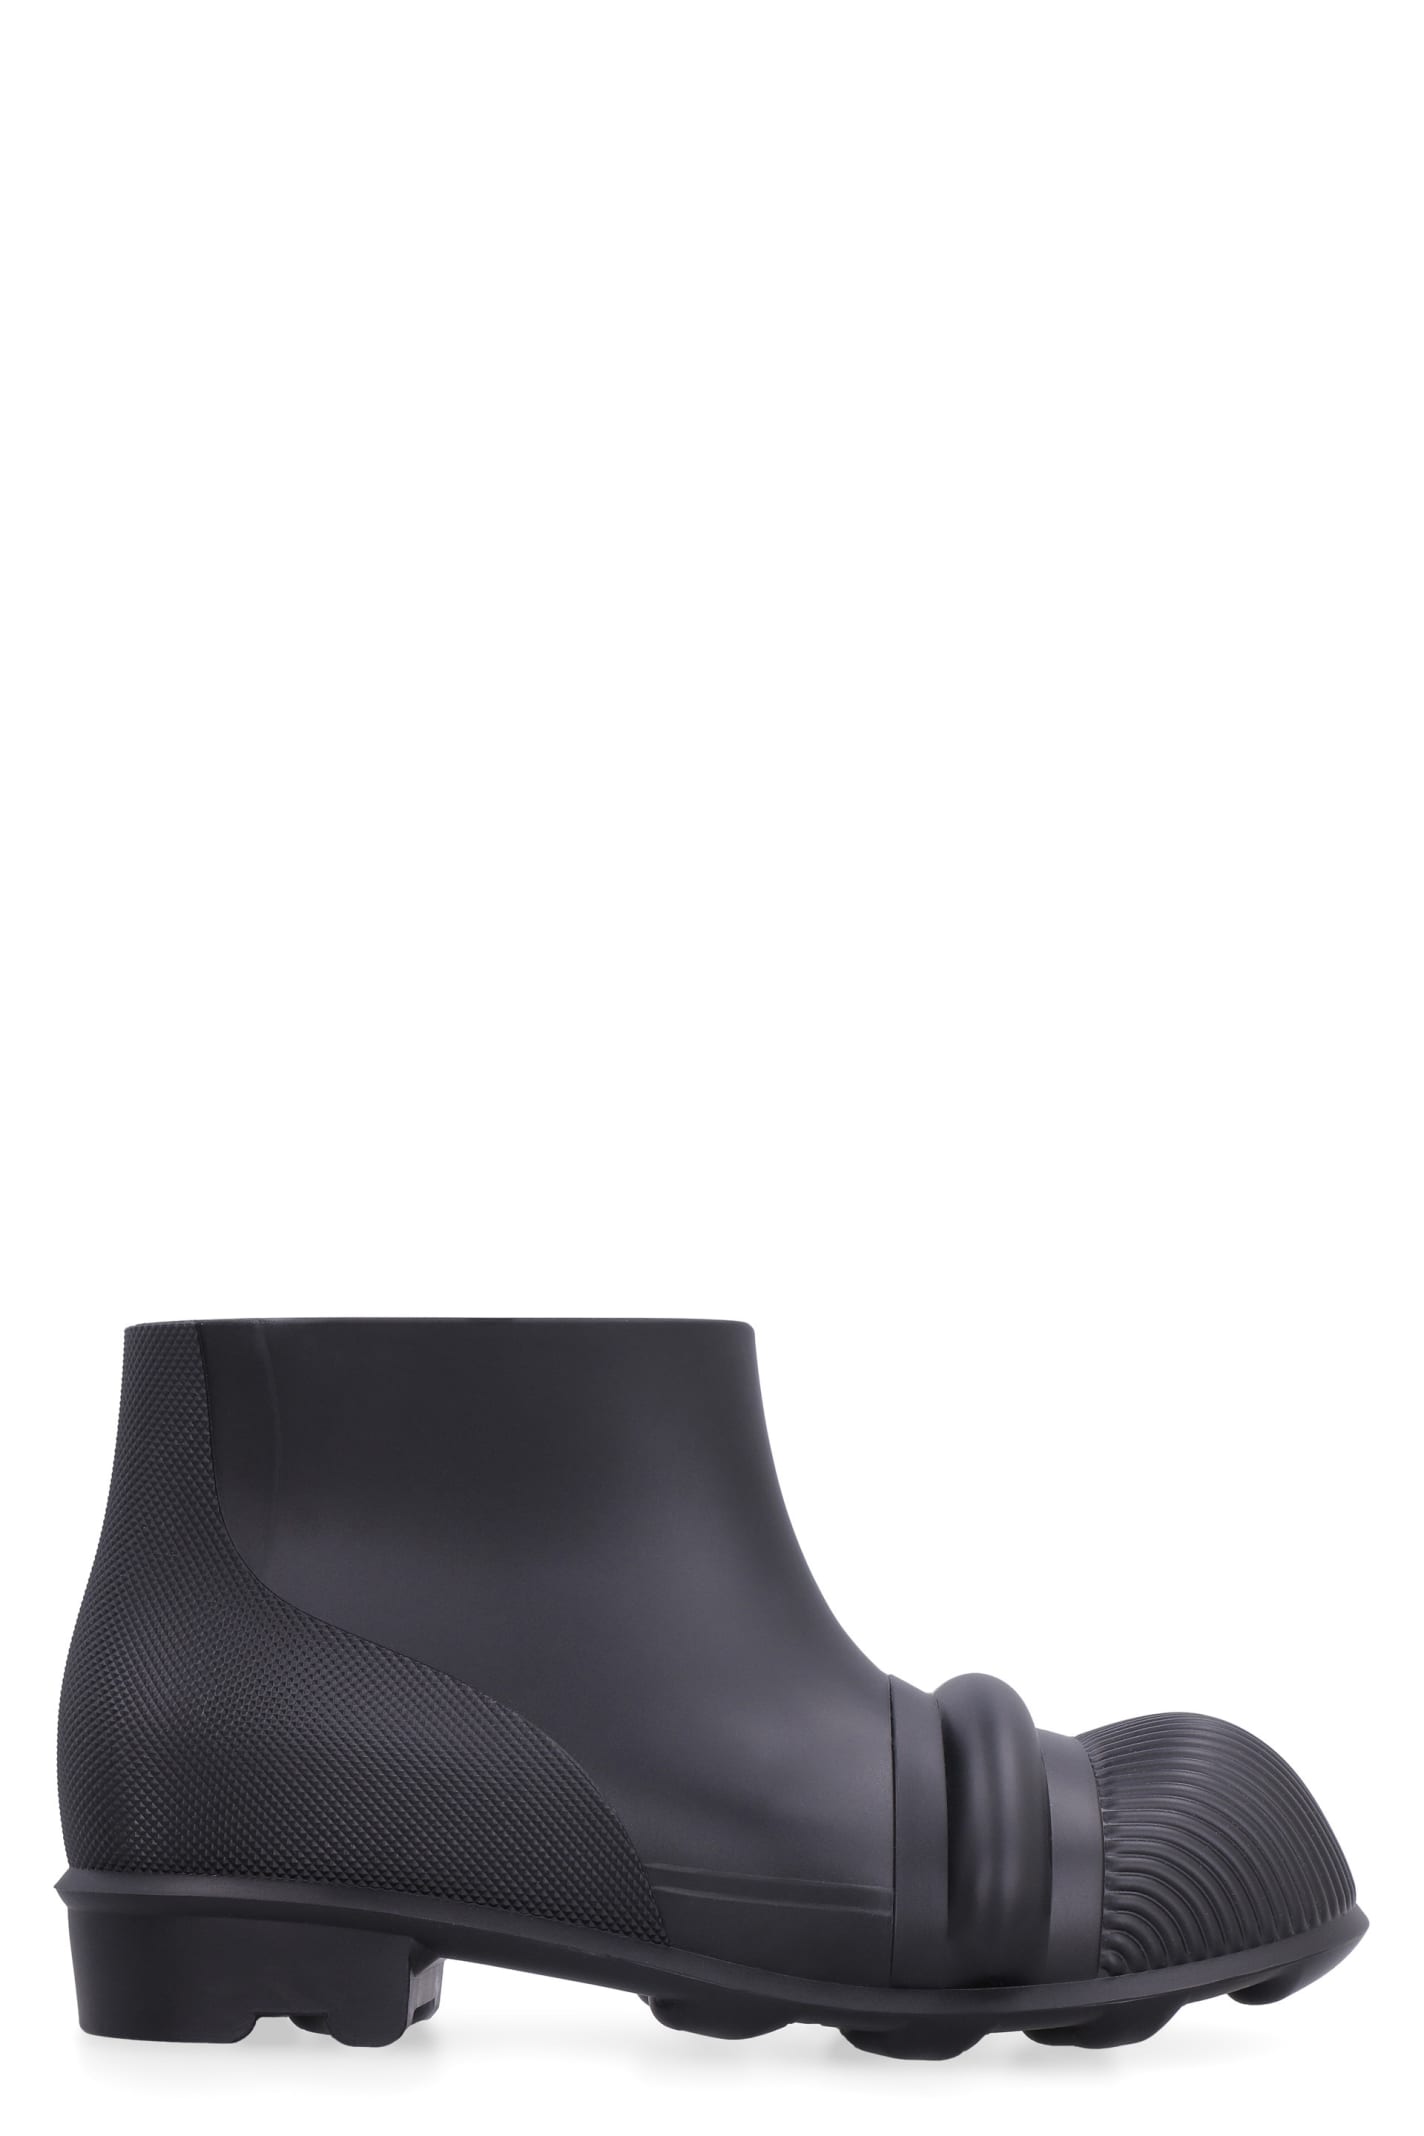 Loewe Rubber Boots